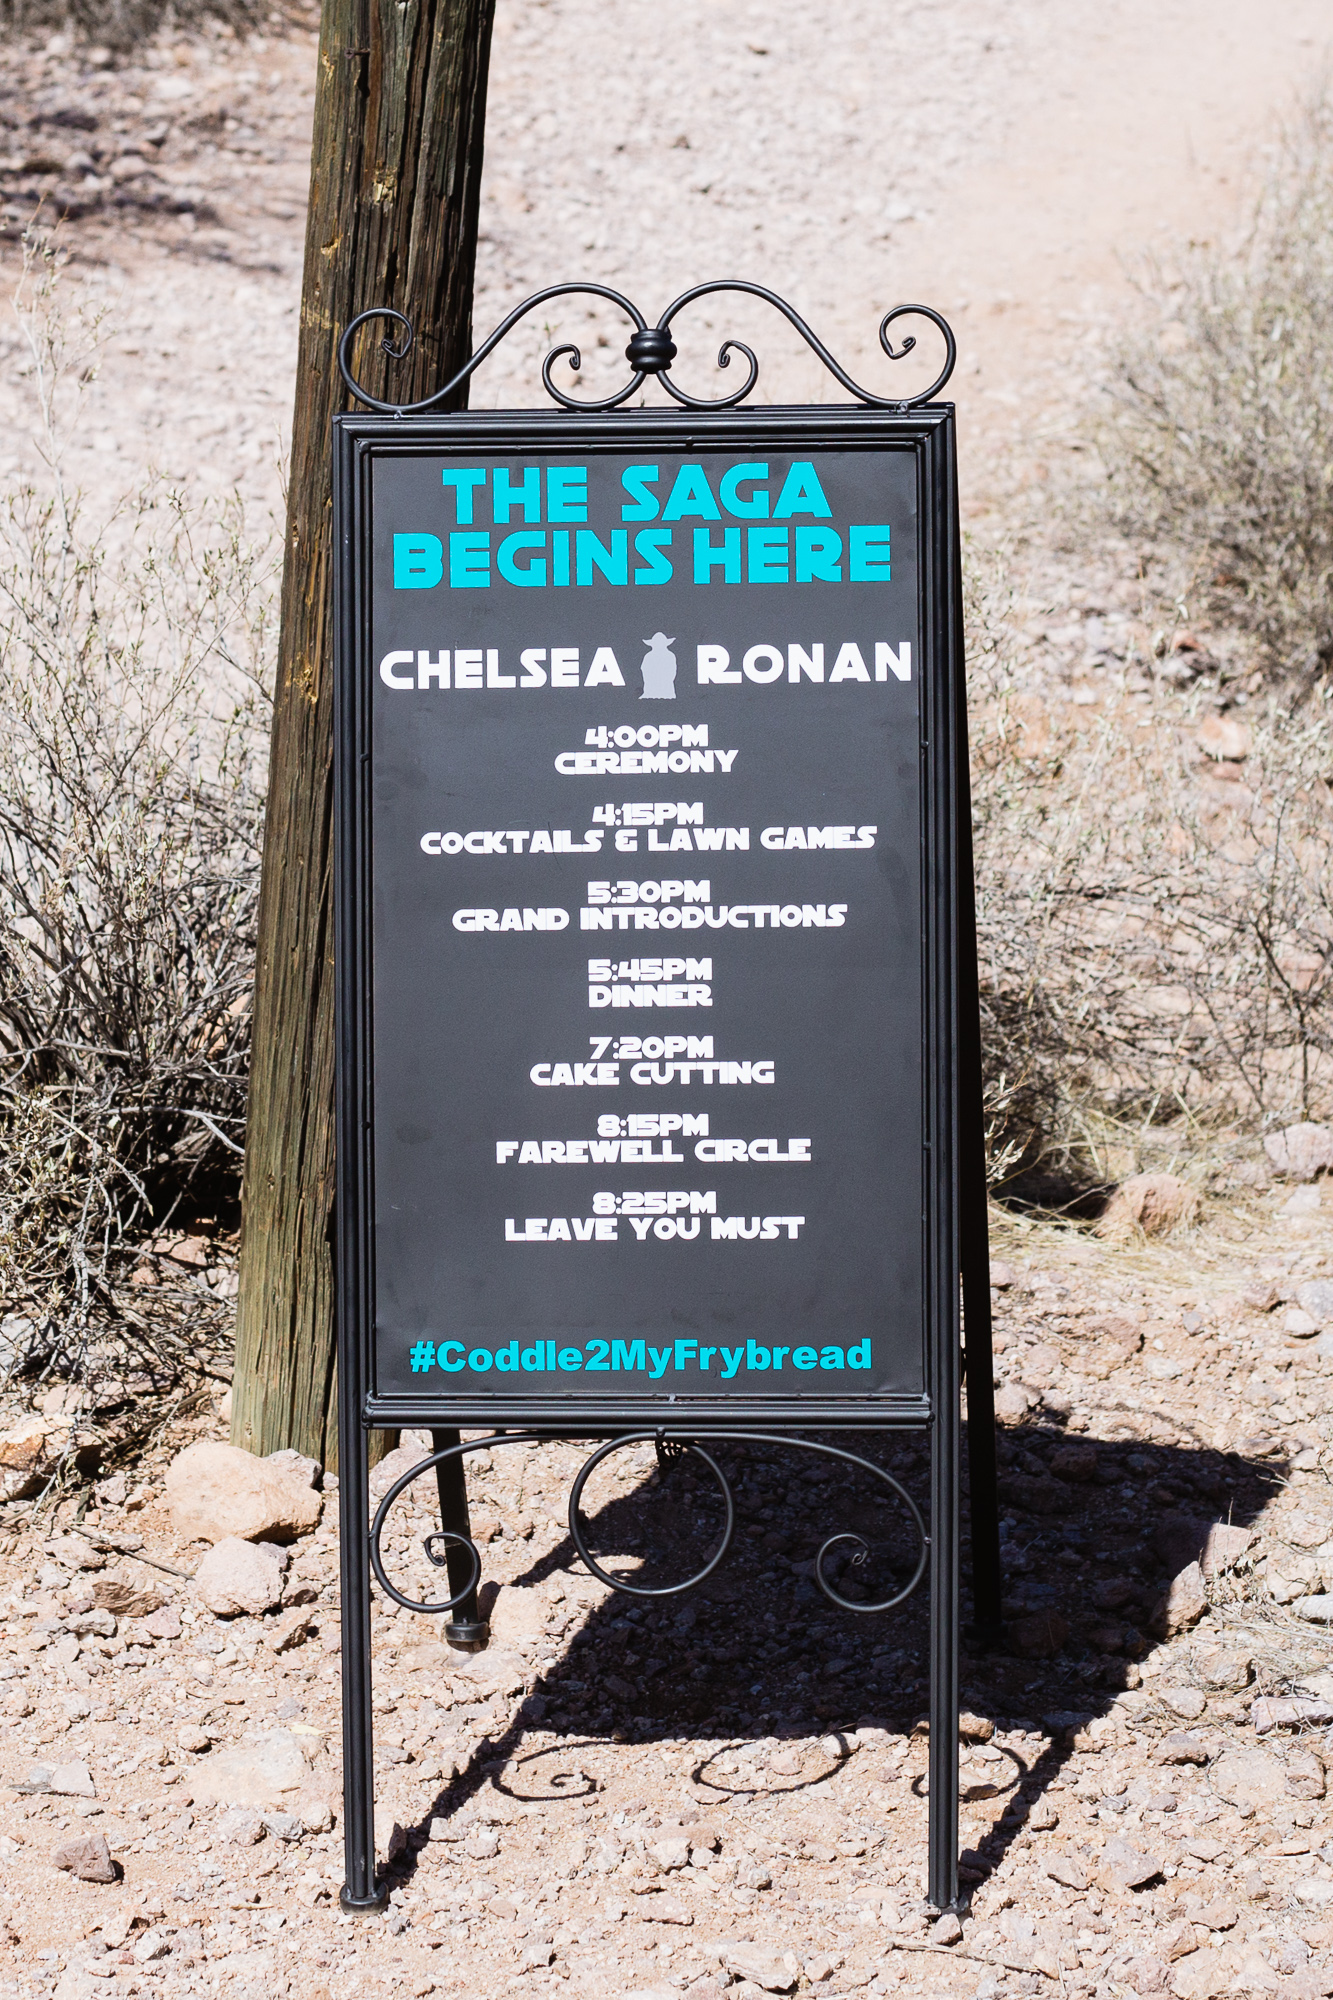 Star Wars inspired wedding timeline sign by PMA Photography.